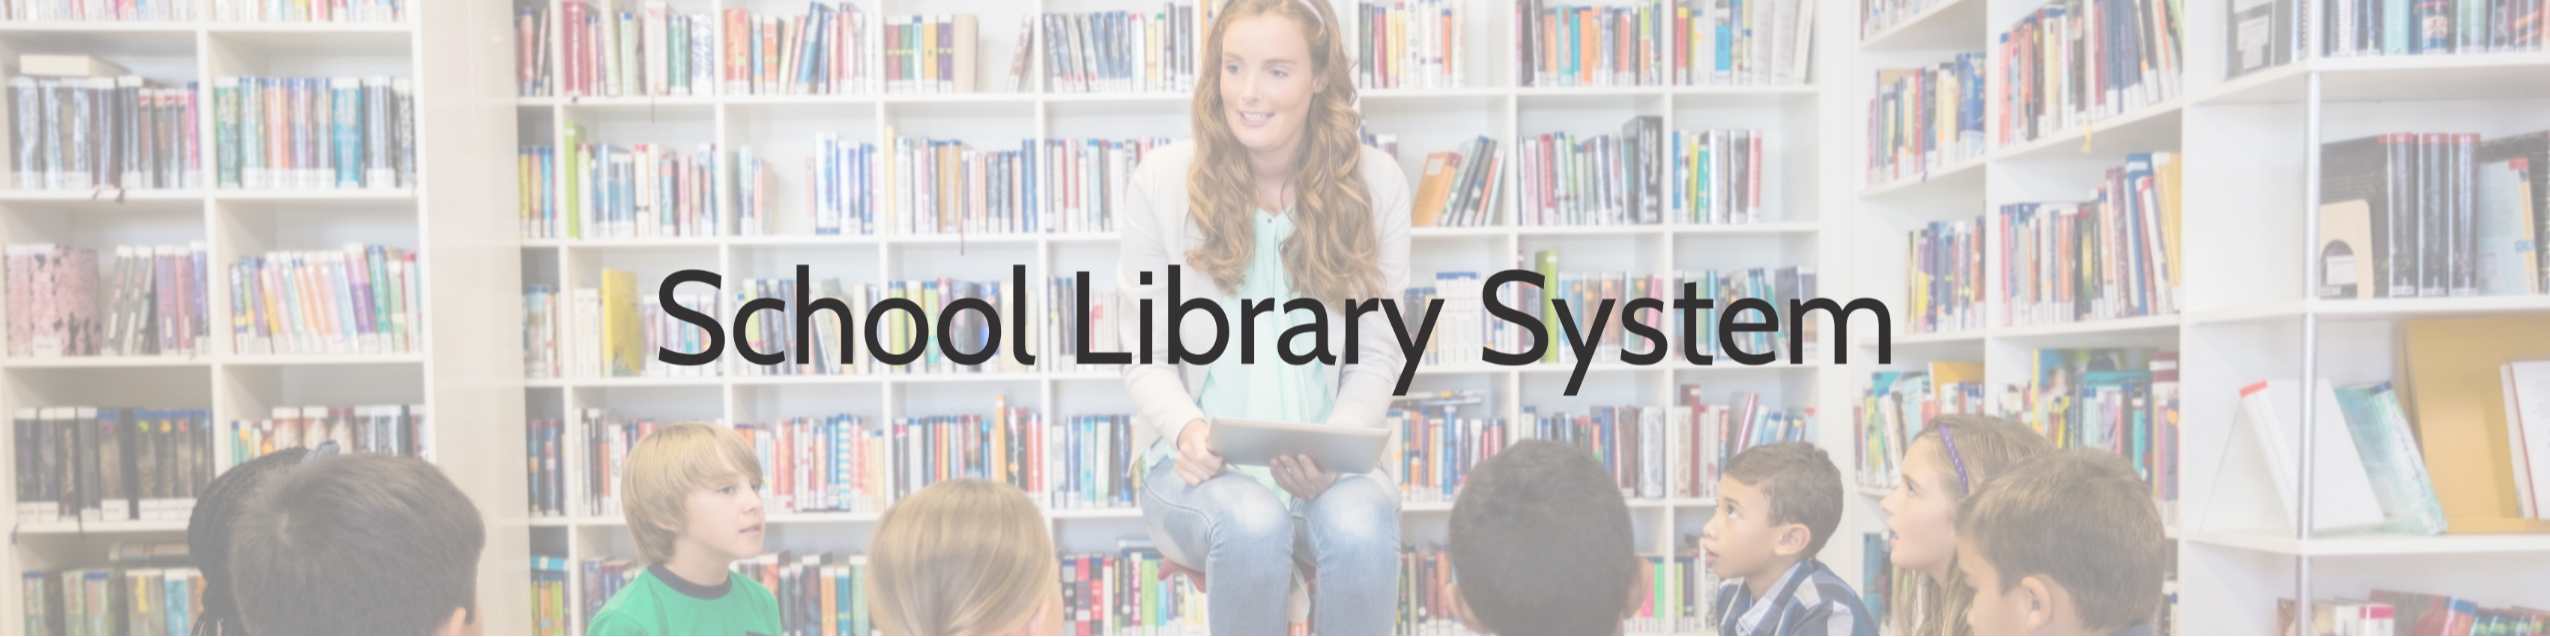 School Library System